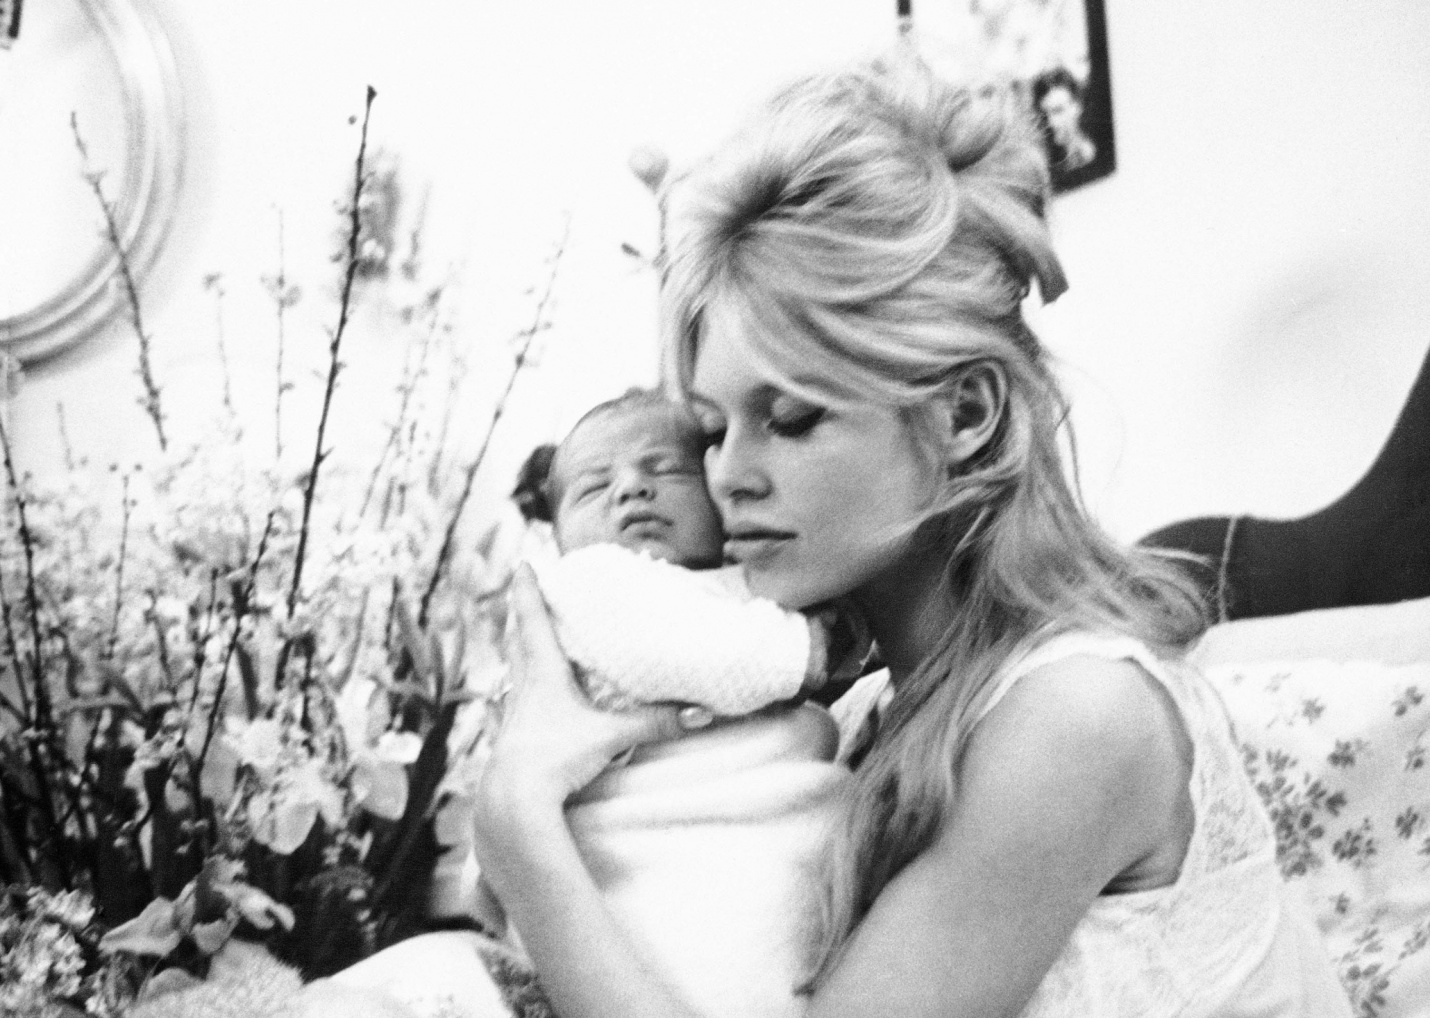 On 11 January 1960 Bardot gave birth to her only child, Nicolas. Here she is cuddling him in her Paris apartment.